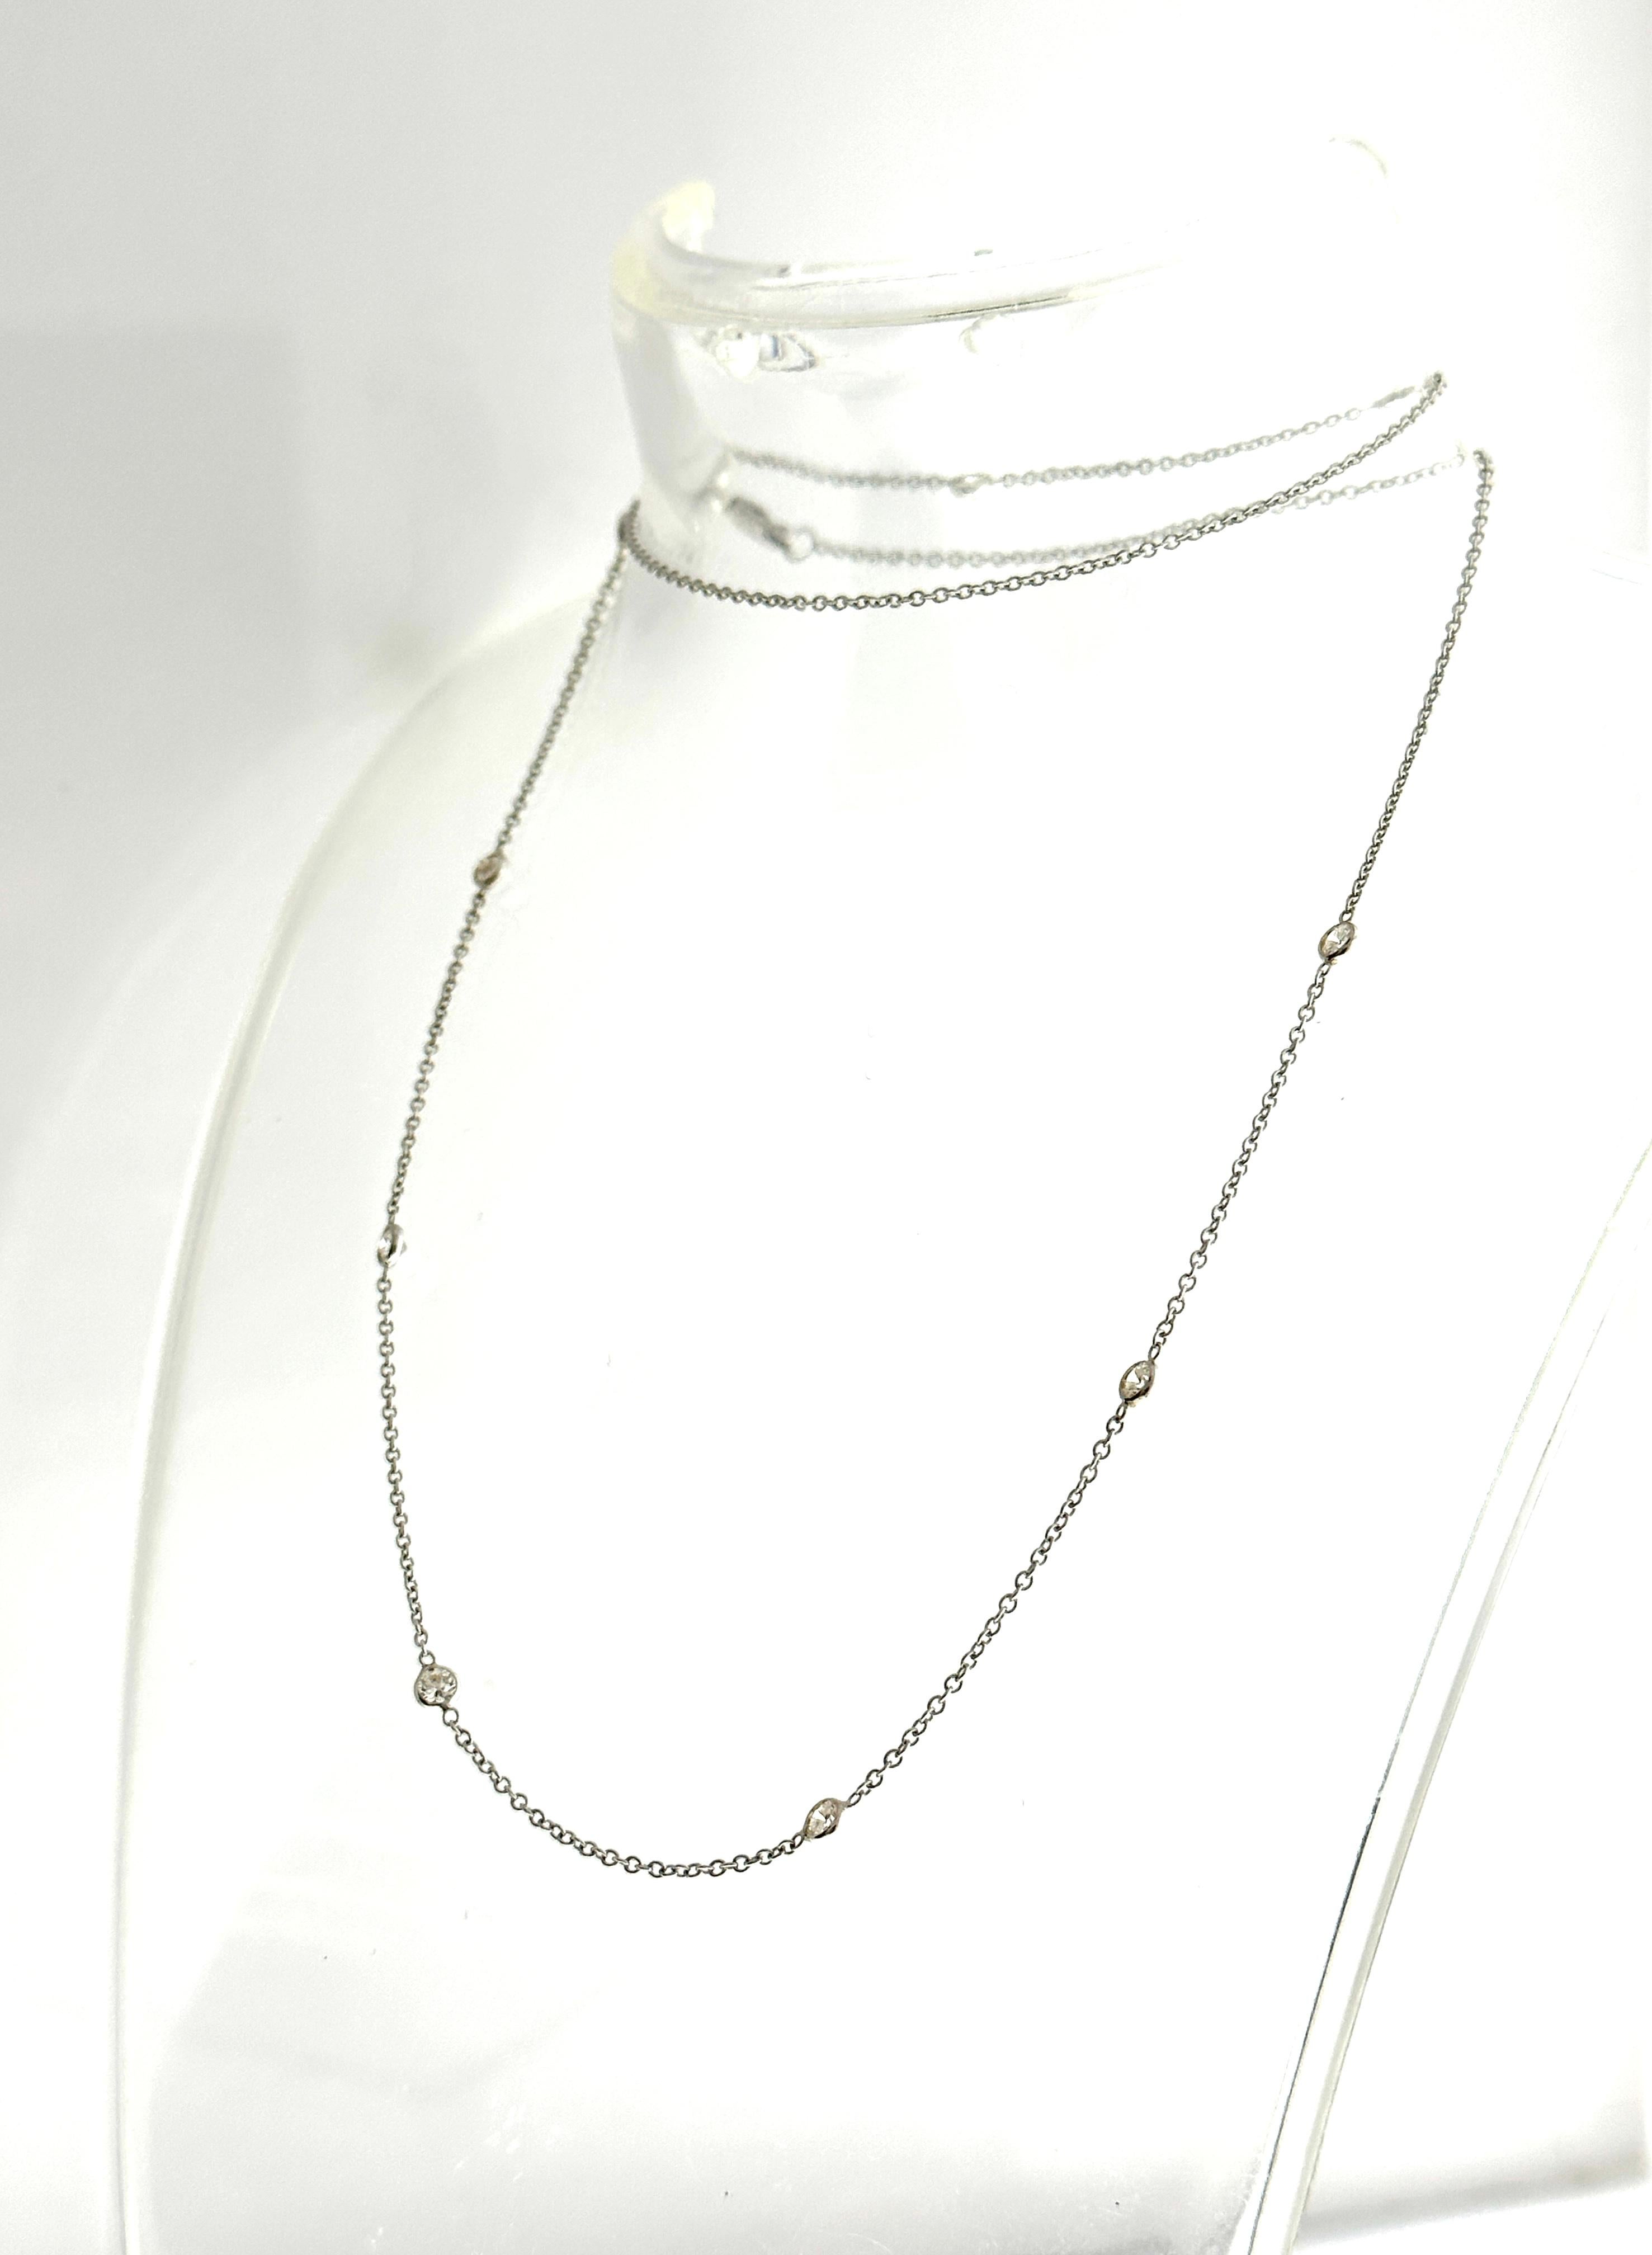 A gorgeous diamond necklace will rarely go overlooked. This 18” piece is both rare and stunning. It includes bezels that set white round diamonds. There are 10 white diamonds that total 0.51 and are G-H color and SI1 clarity. This versatile necklace